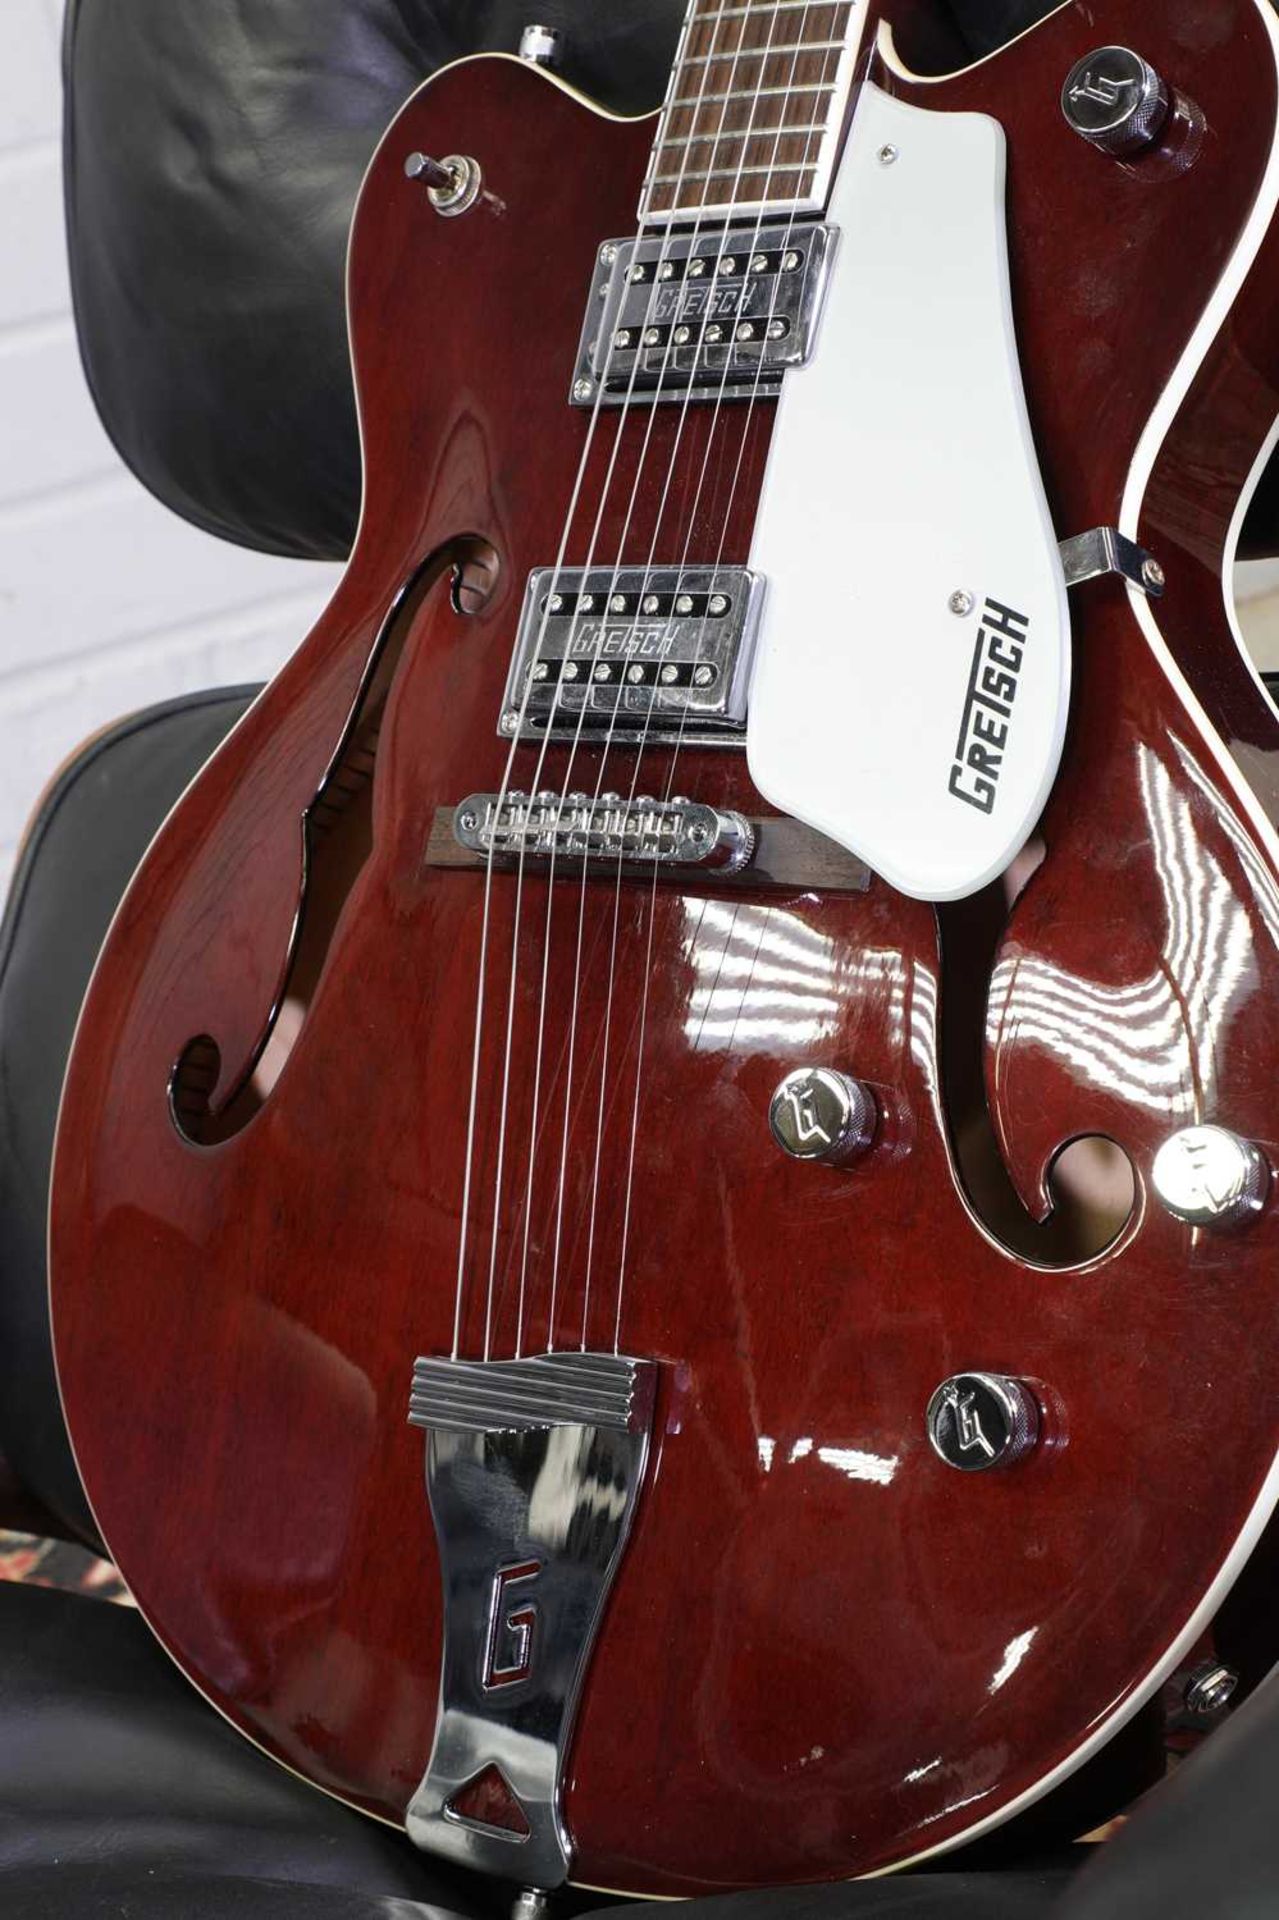 A Gretsch Electromatic semi-hollow electric guitar, - Image 6 of 8